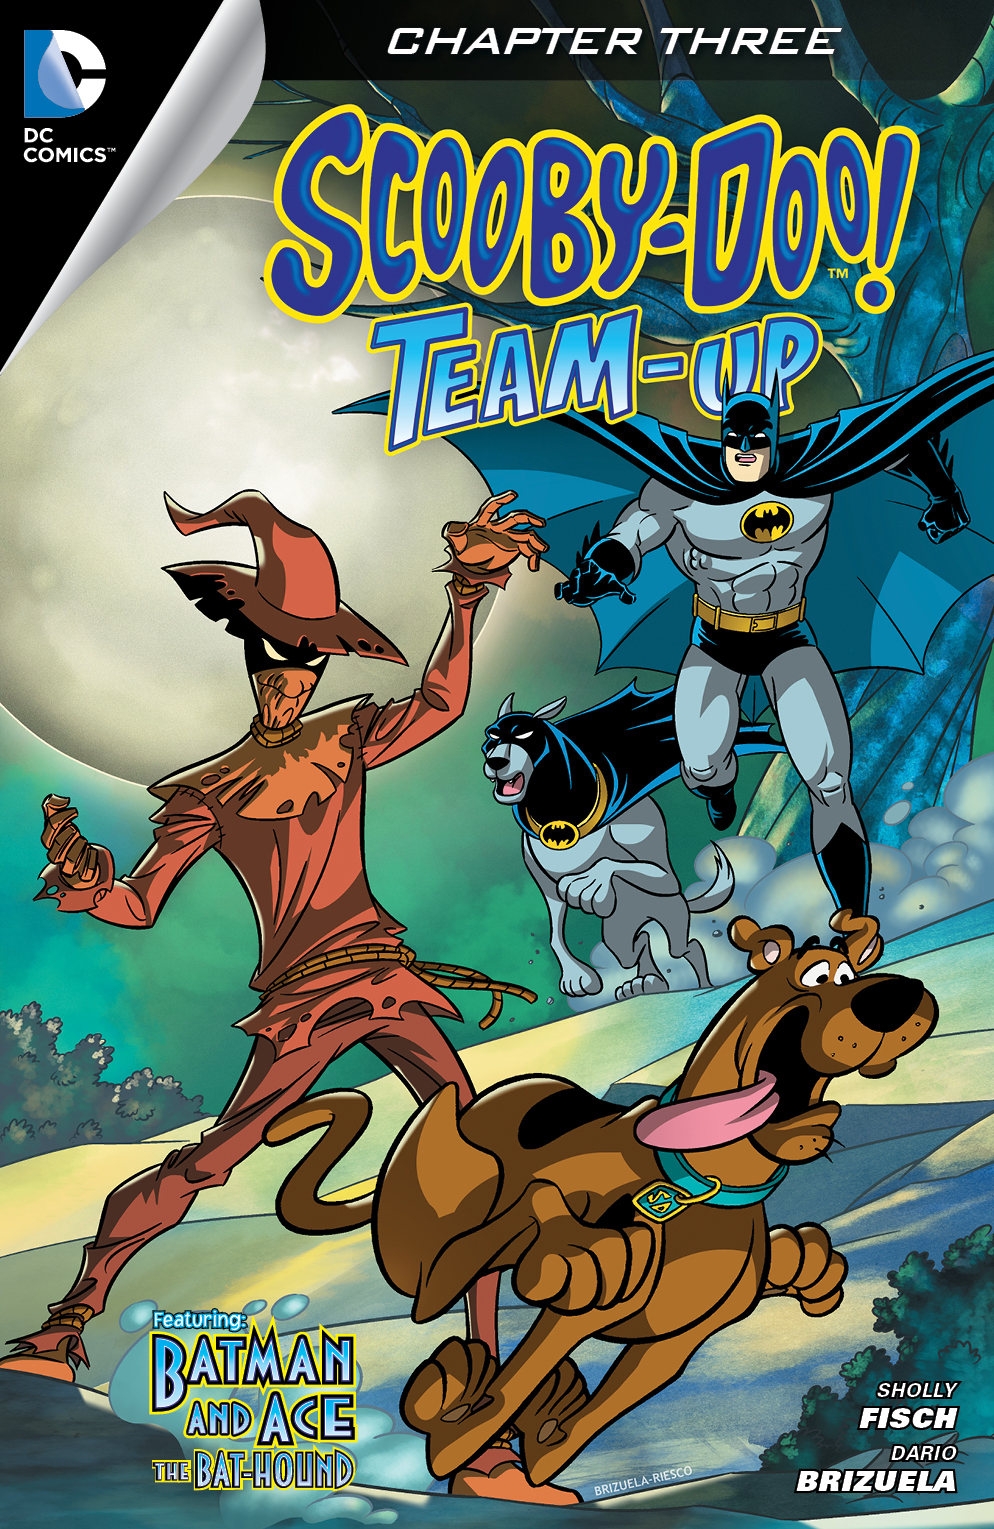 Scooby-Doo Team-Up #3 preview images